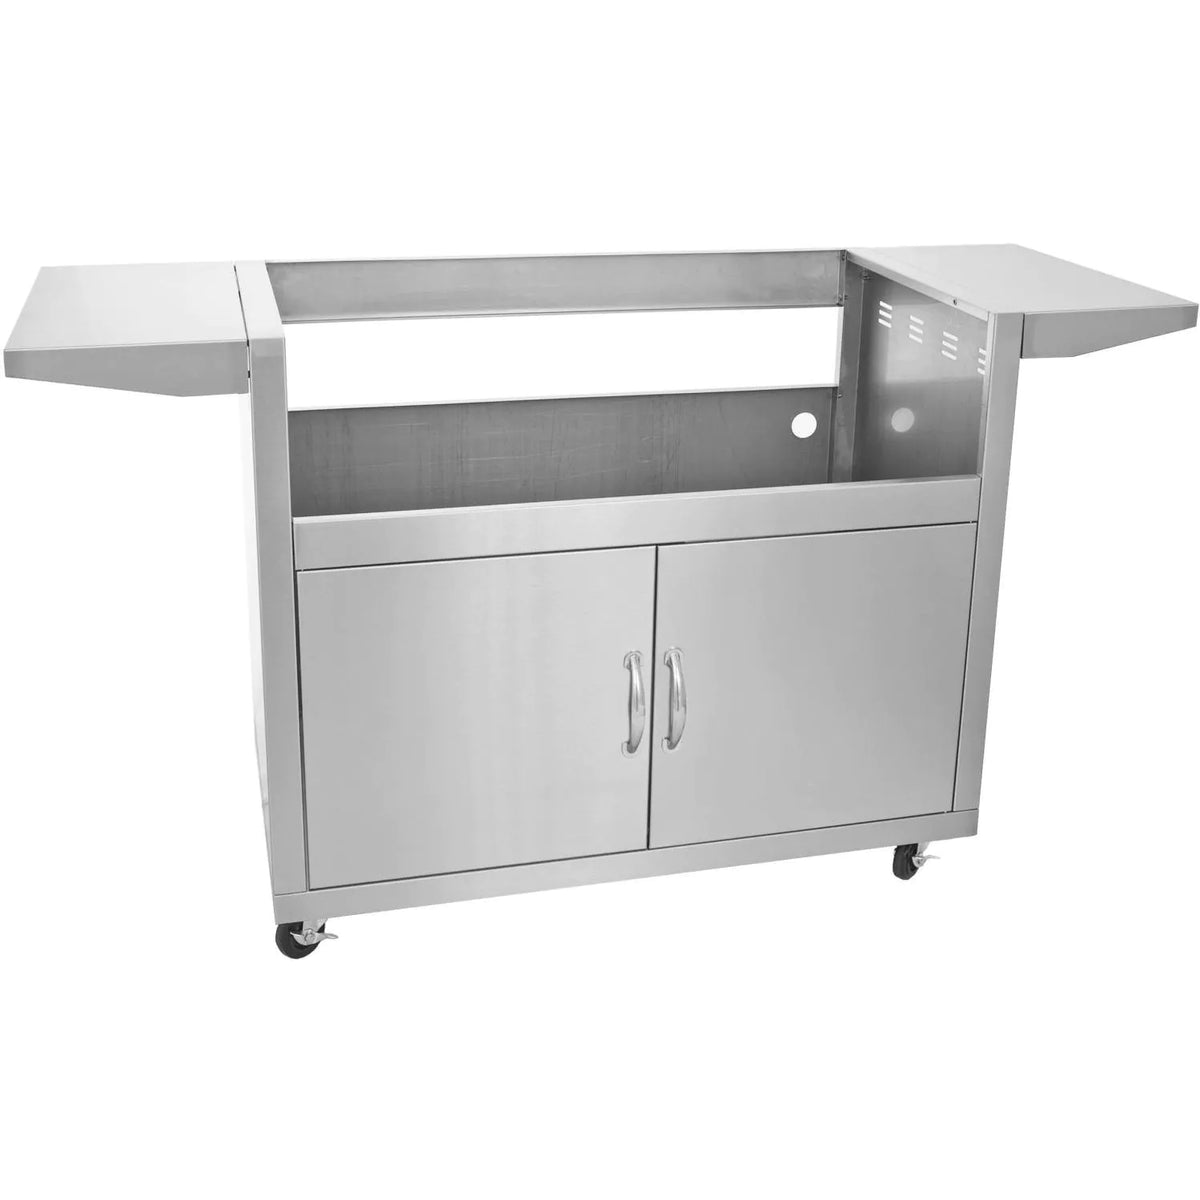 Blaze 5 Burner 40 Inch Grill Cart Side Angle View